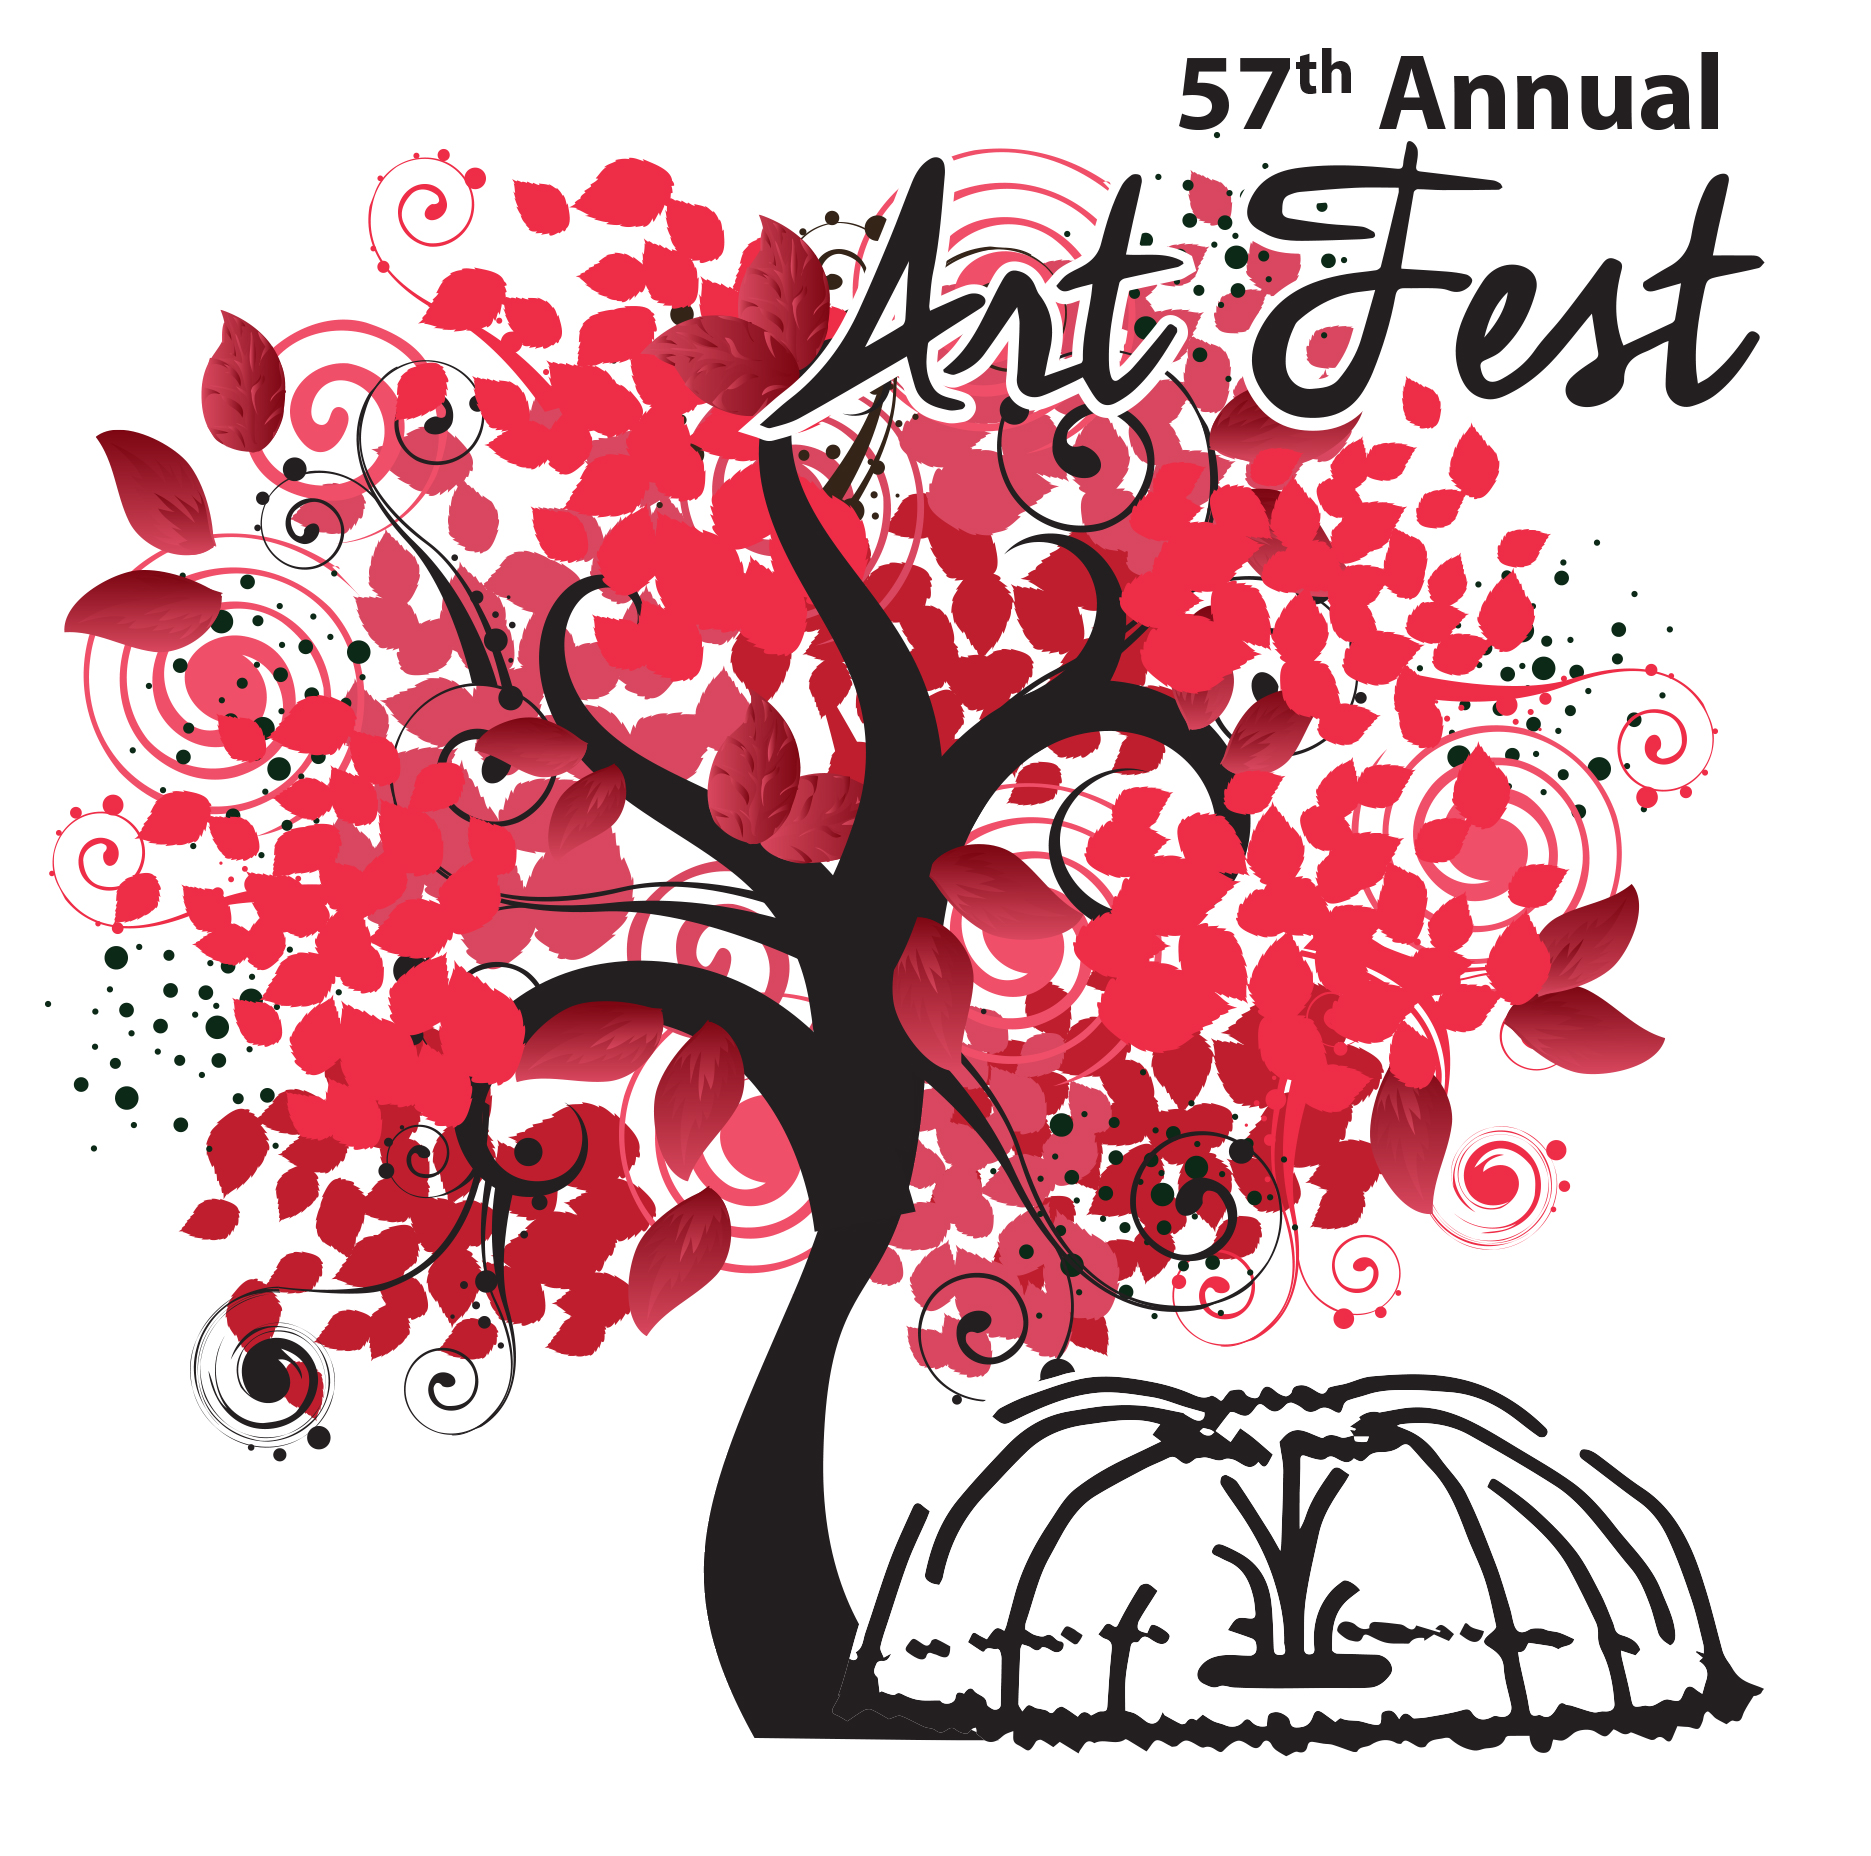 ArtFest logo with red tree